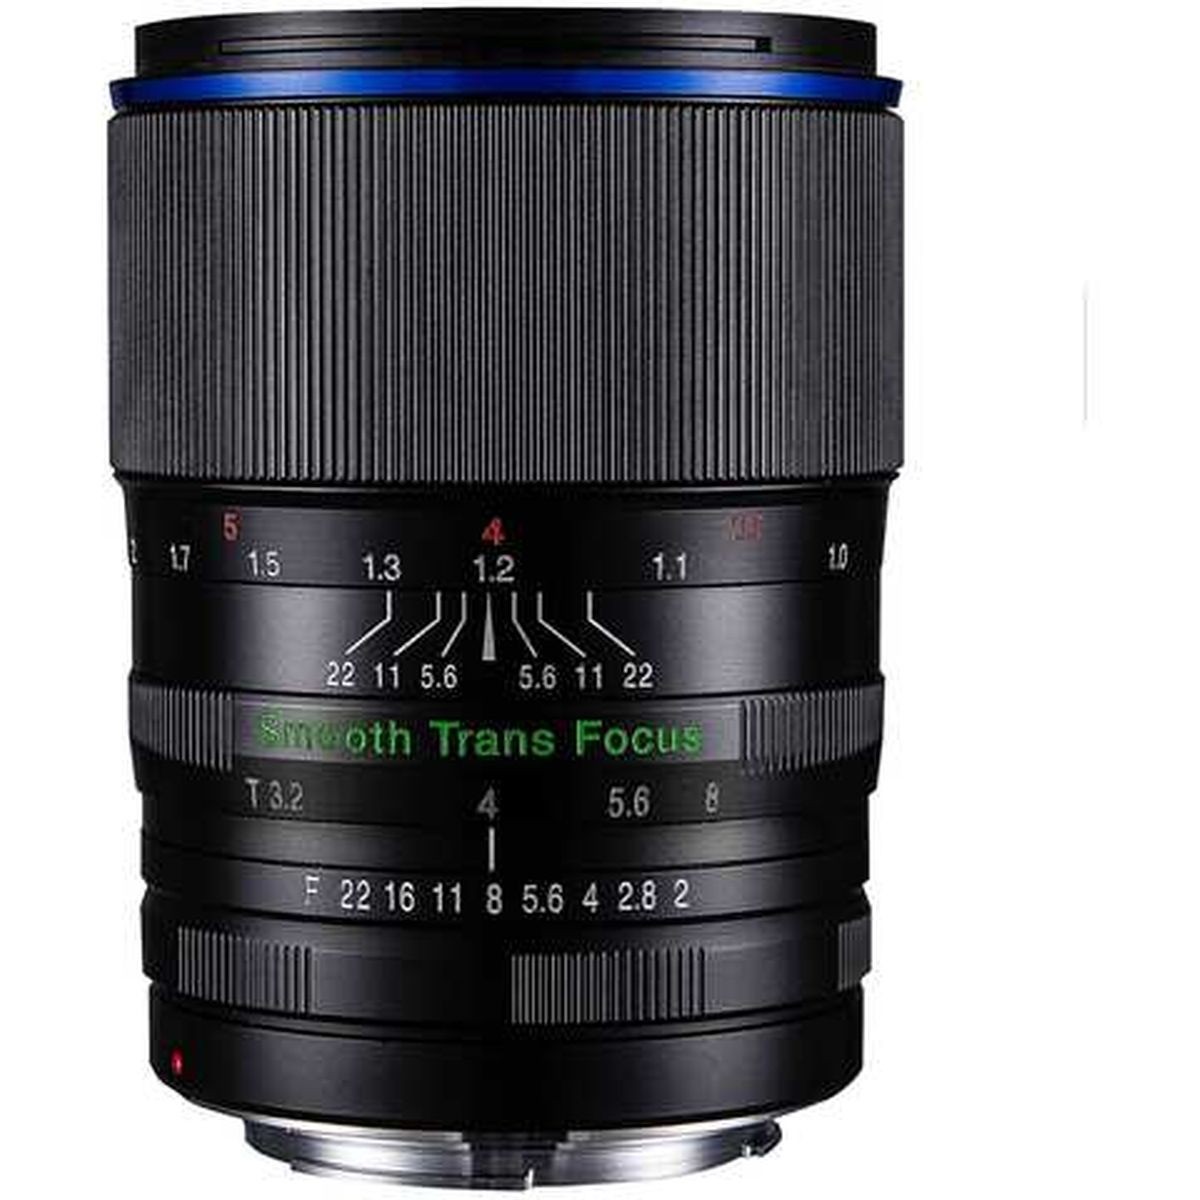 LAOWA 105mm F/2.0 (T3.2) STF - Smooth Trans Focus Canon EF